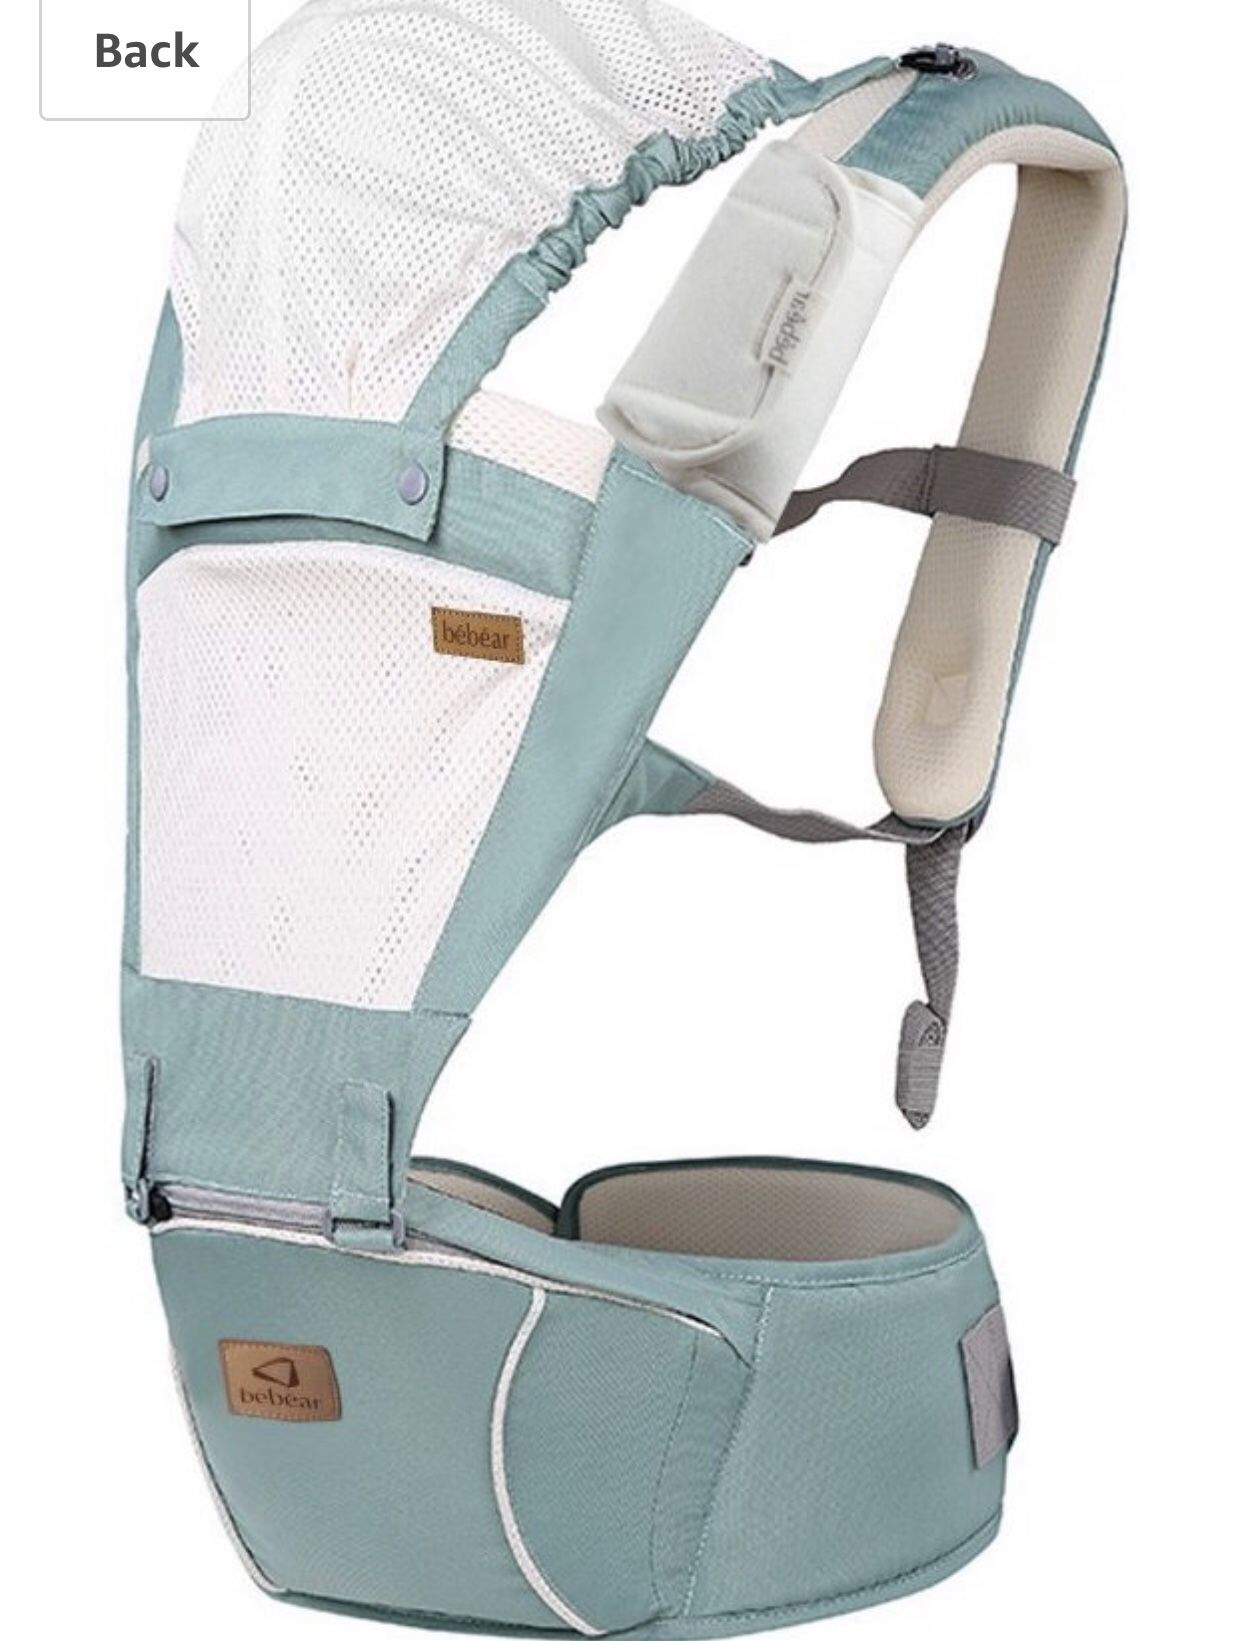 Bébéar Sling and Baby Carrier 2 in 1.